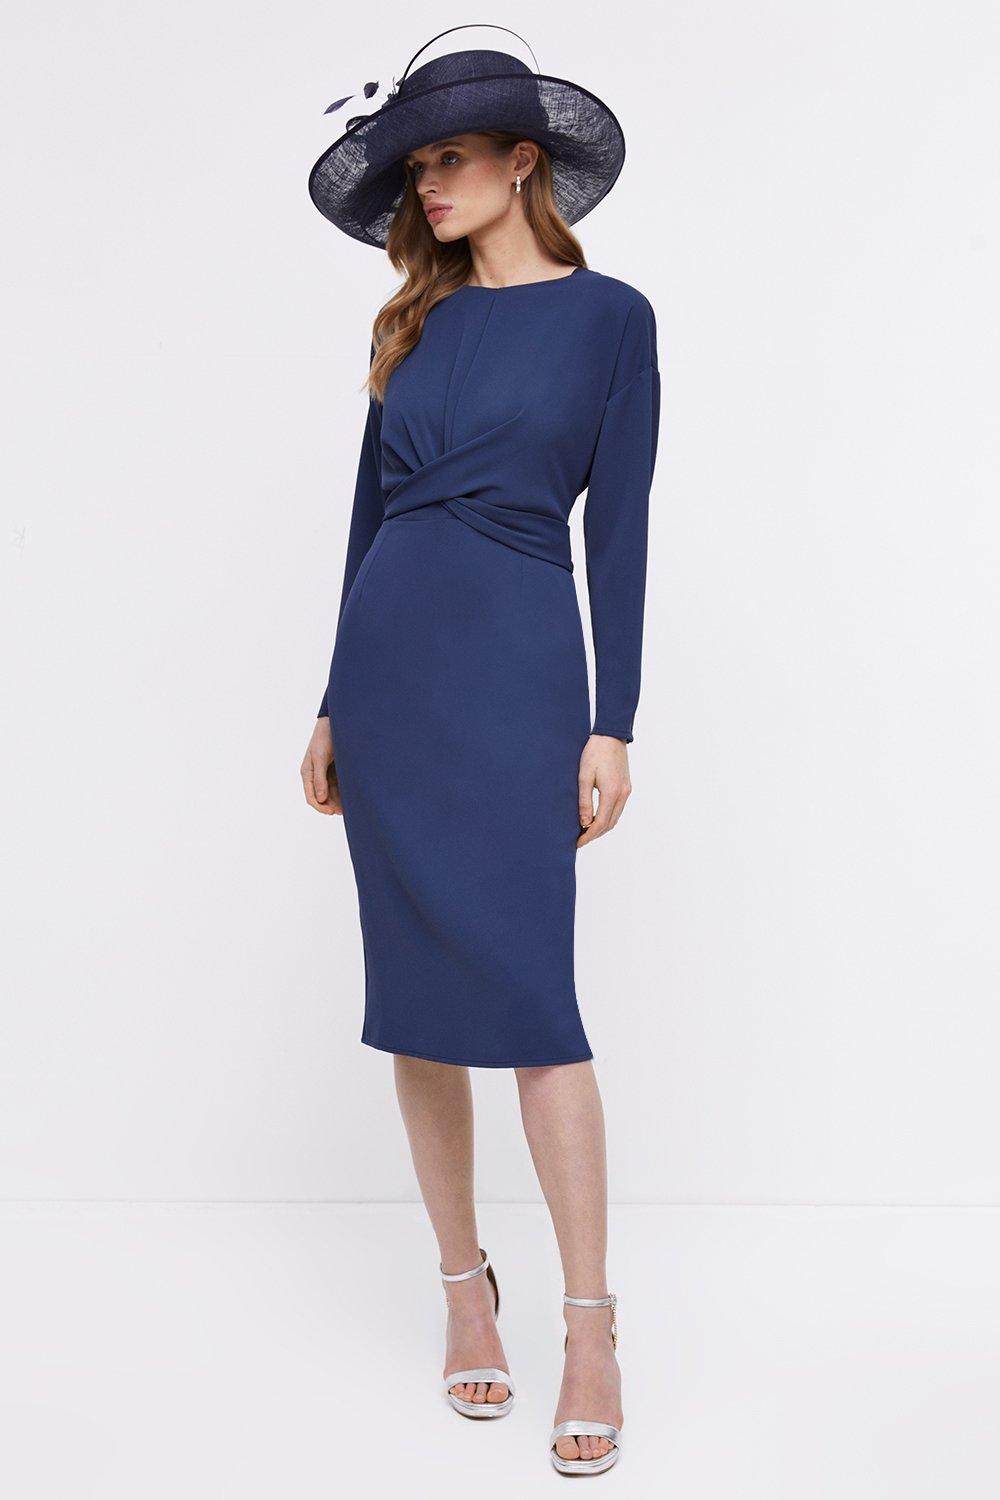 Midi Pencil Dress With Twist Front & Long Sleeve - Navy